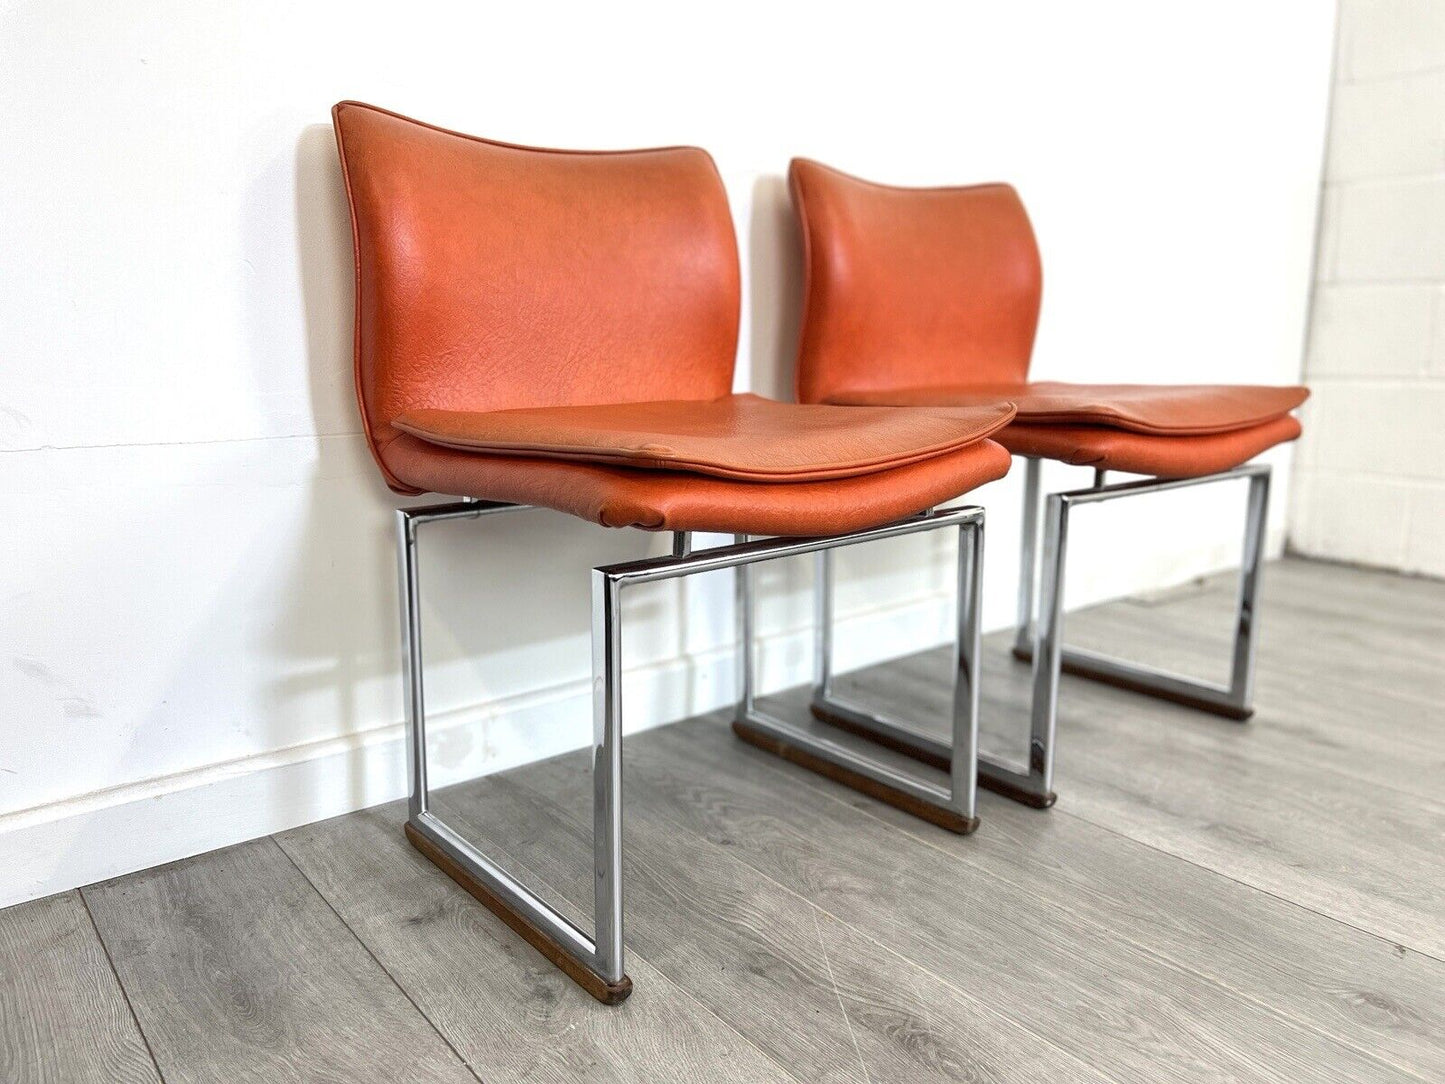 Pieff Epee, Pair of Chrome and Orange Leather Dining Chairs